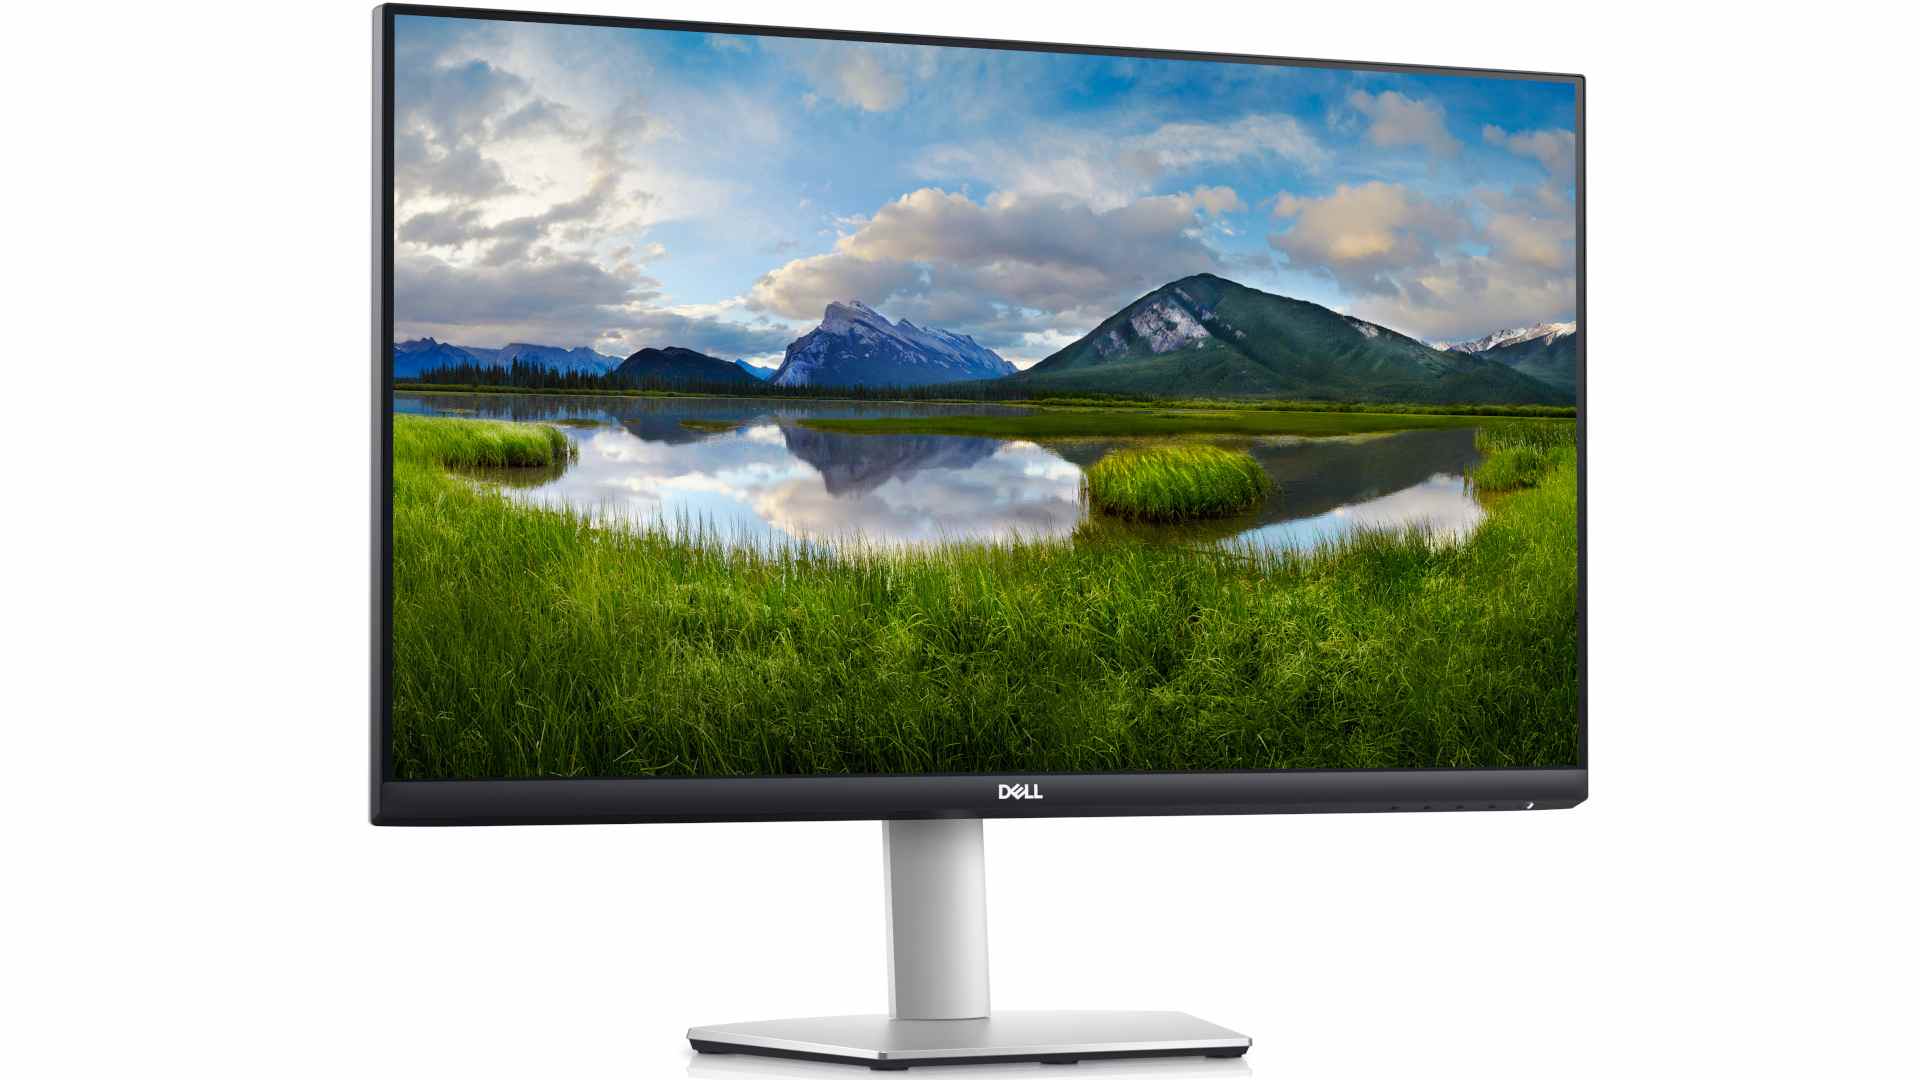 DELL S2721QS 27 Inch IPS Monitor 3